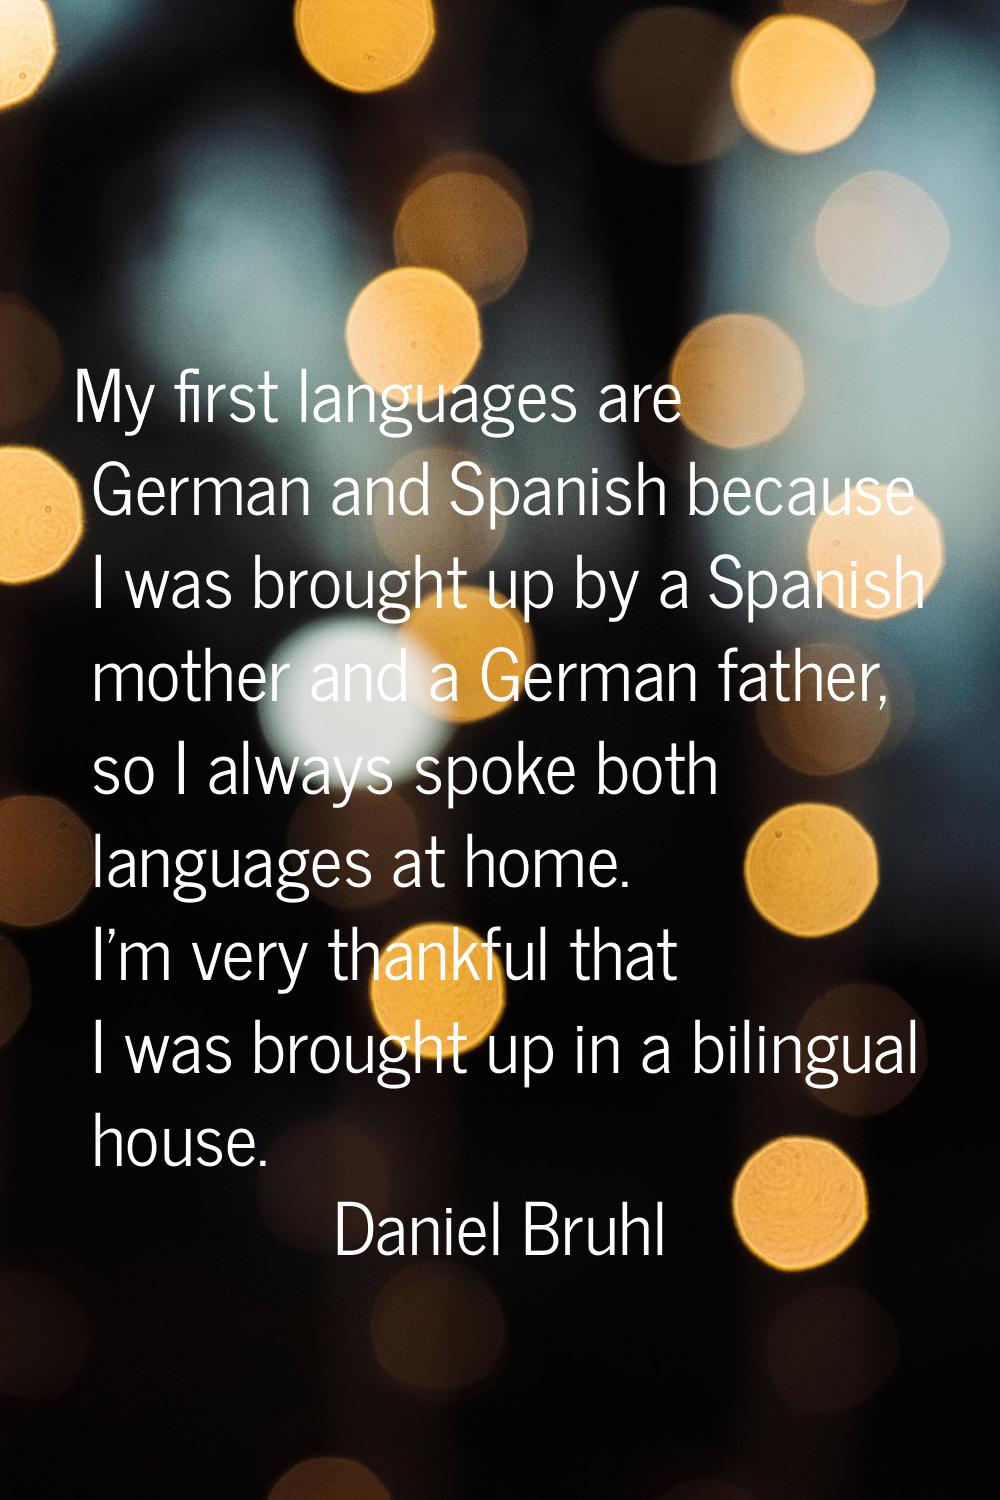 My first languages are German and Spanish because I was brought up by a Spanish mother and a German